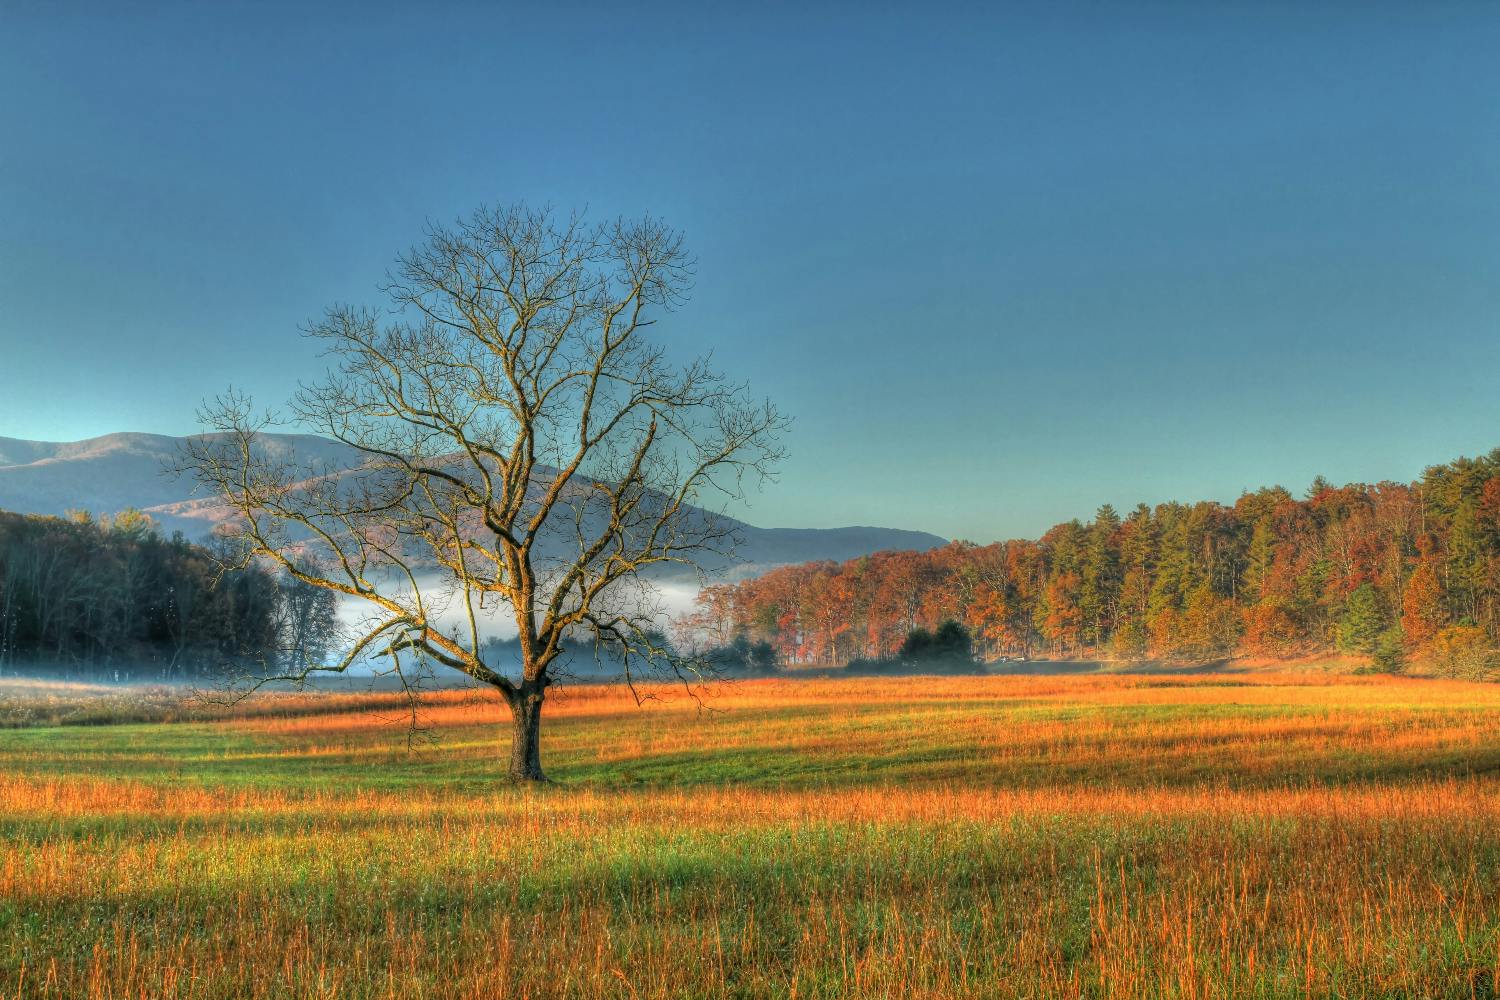 Cades Cove and Great Smoky self-guided bundle tour